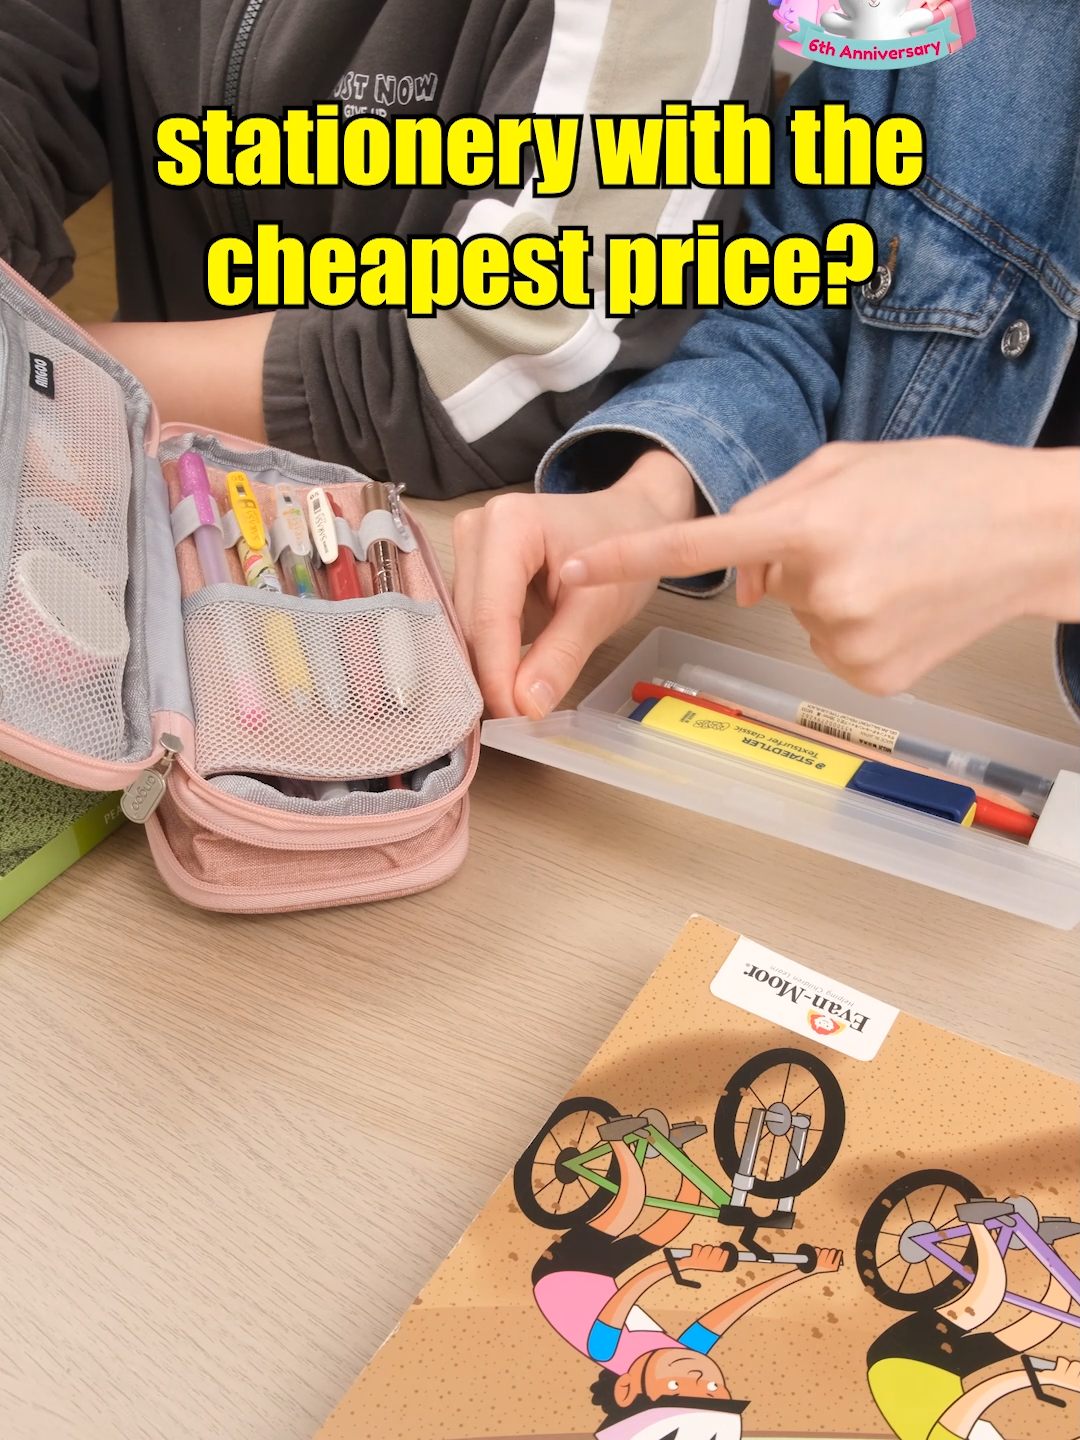 How does your desk mate always get the latest stationery at the cheapest price? #capcut  #stationerypal  #stationery  #fyp  #highlighter  #hacks  #eraser  #schoolhacks  #tips  #backtoschool